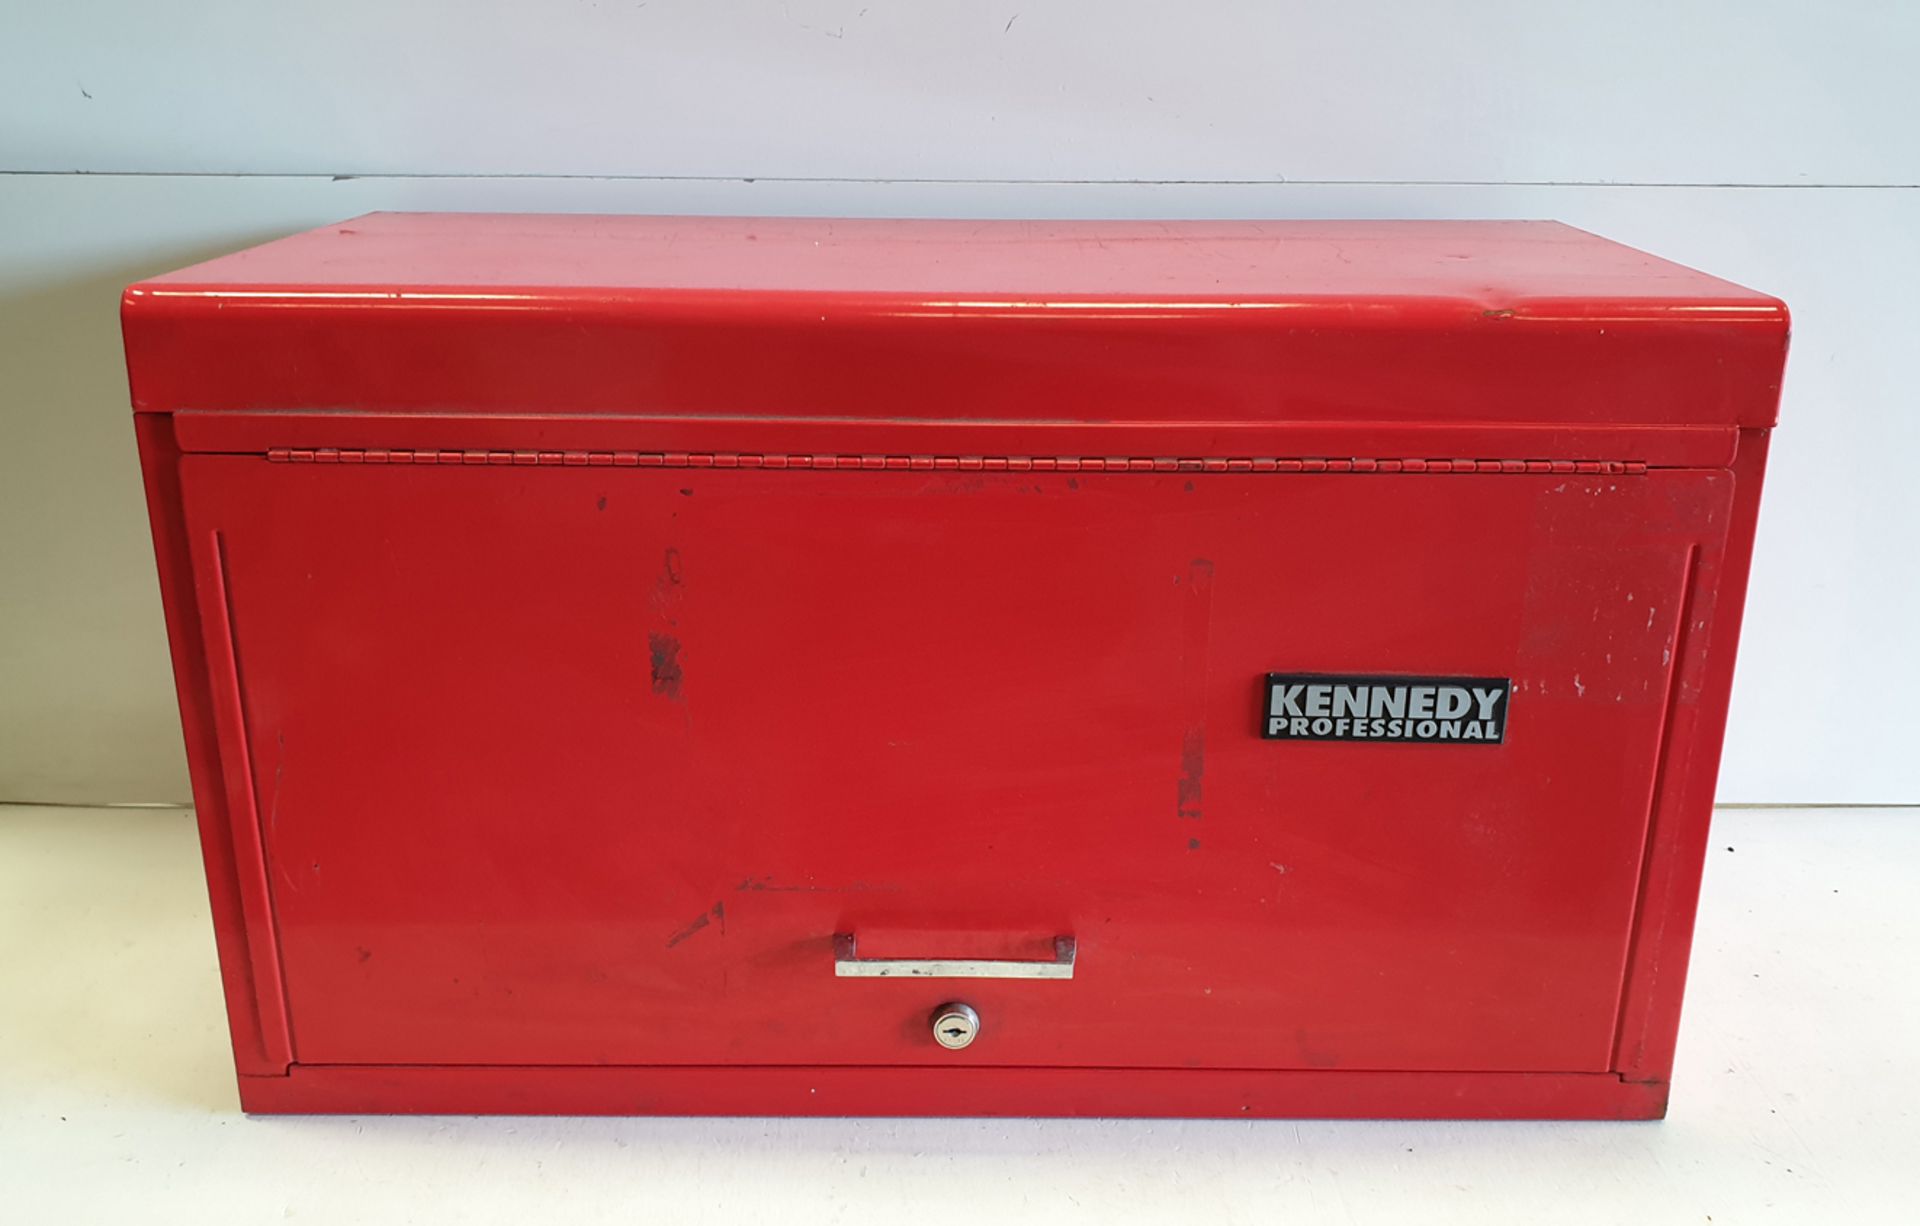 Kennedy Proffesional Steel Tool Box. Approx Dimentions 670mm x 330mm x 390mm High.